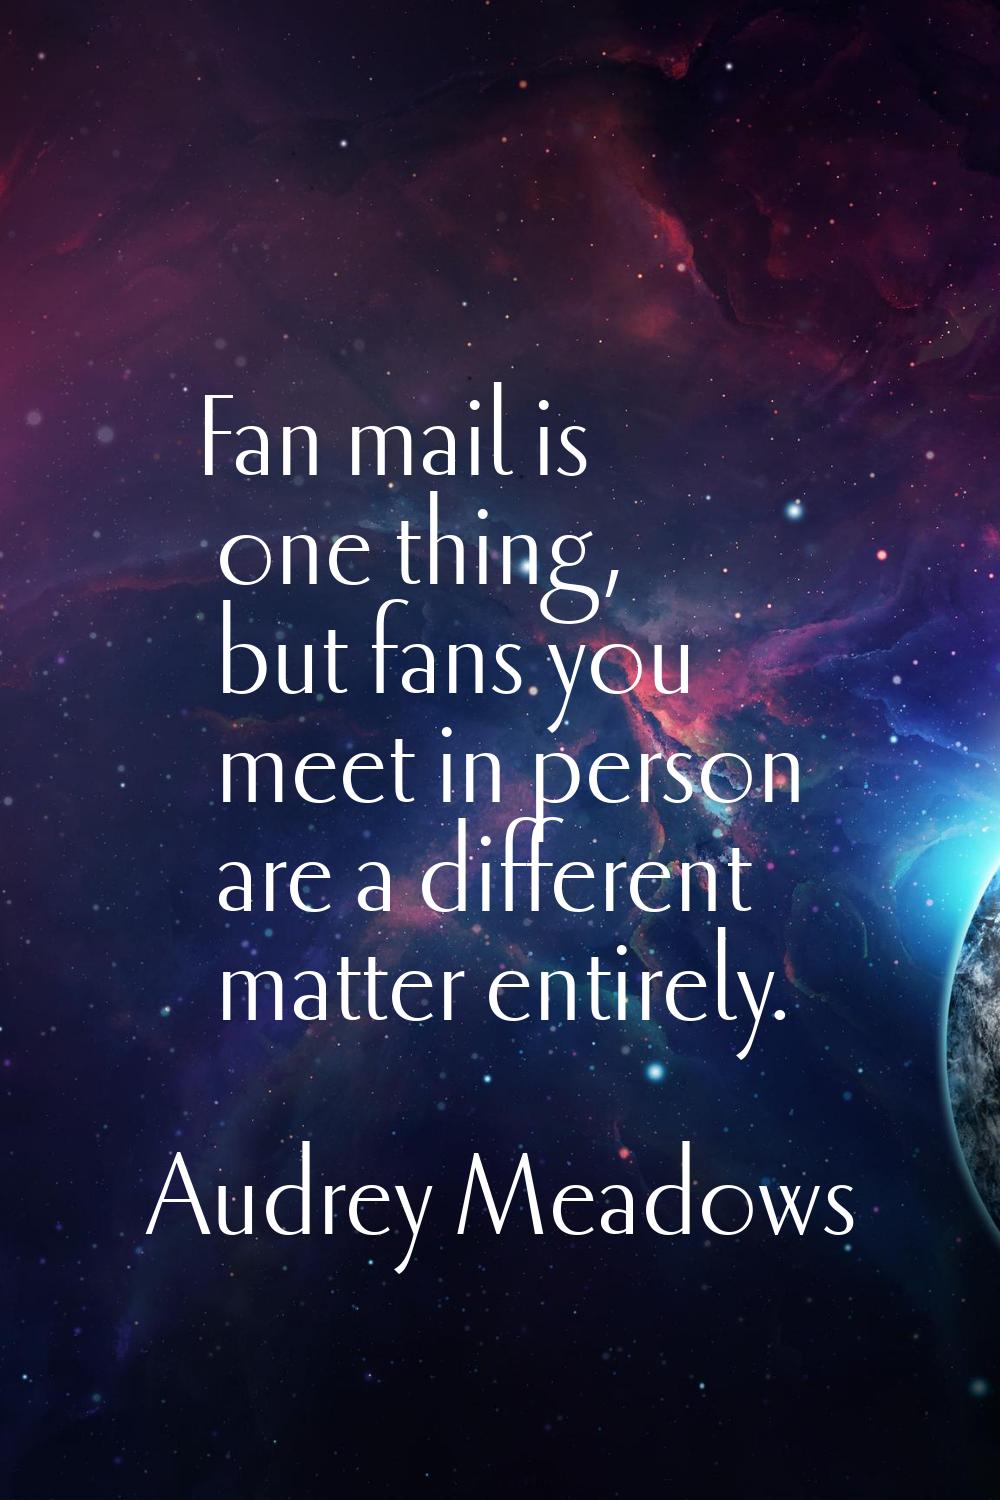 Fan mail is one thing, but fans you meet in person are a different matter entirely.